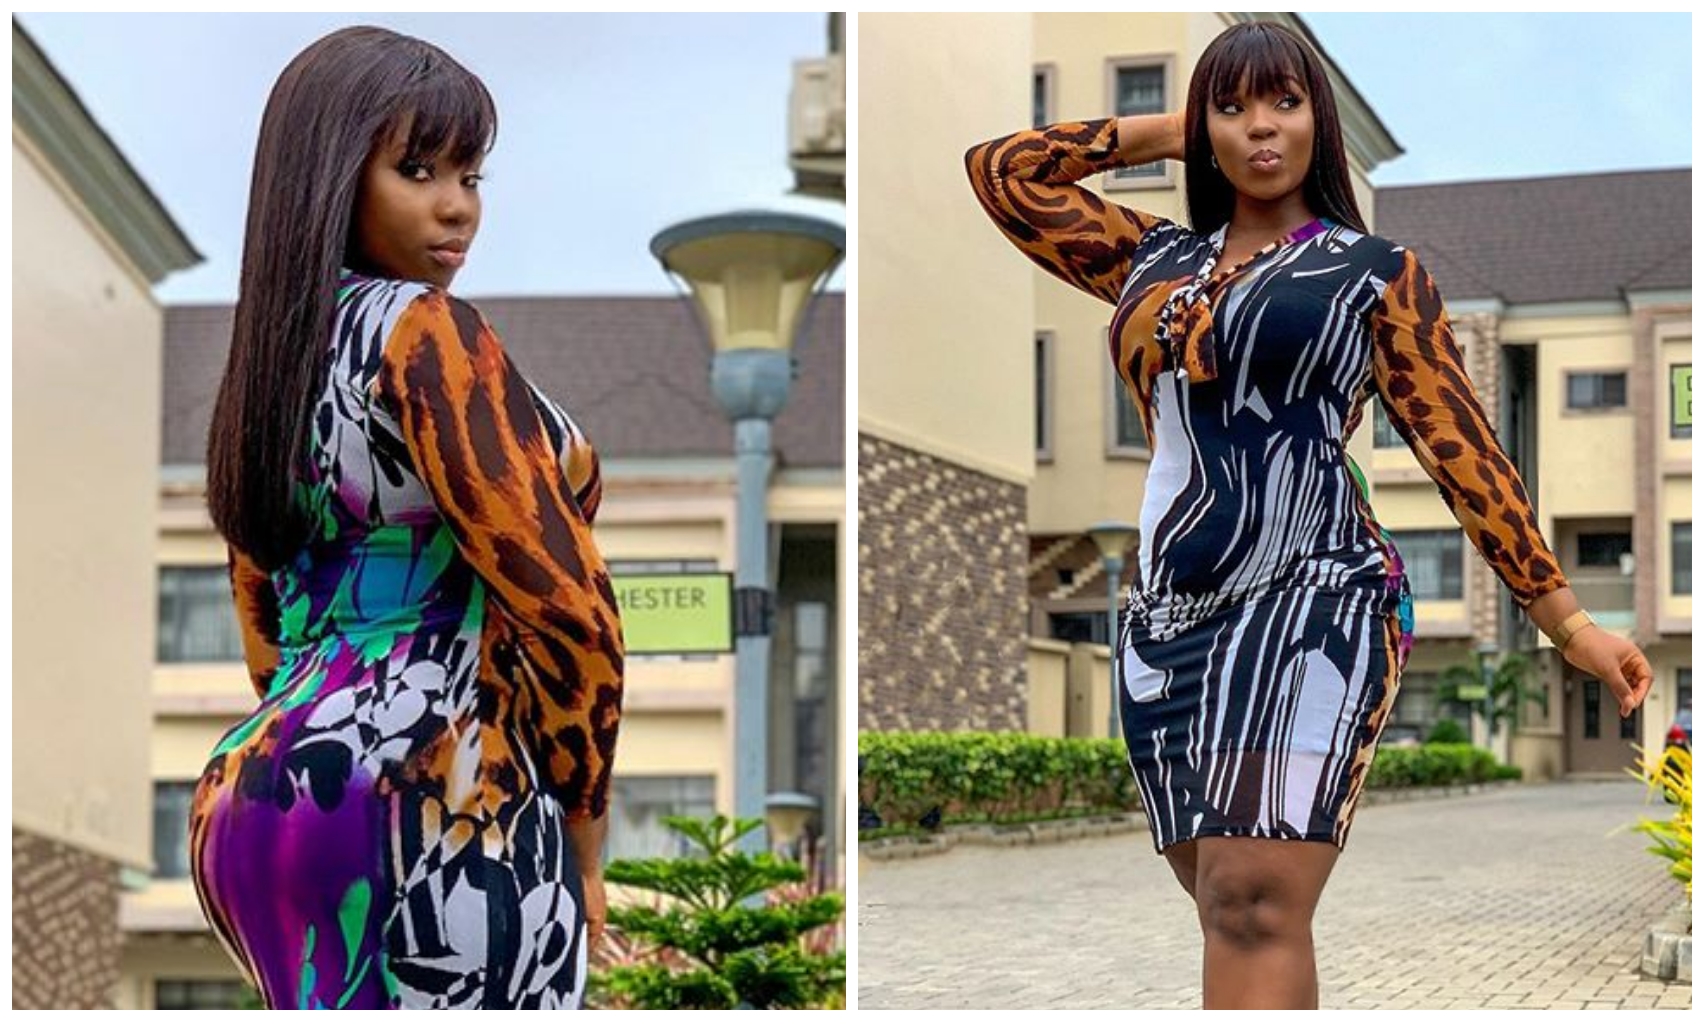 #BBNaija: Bam Bam dish out fashion goals as she steps out in a colorful outfit (Photos)